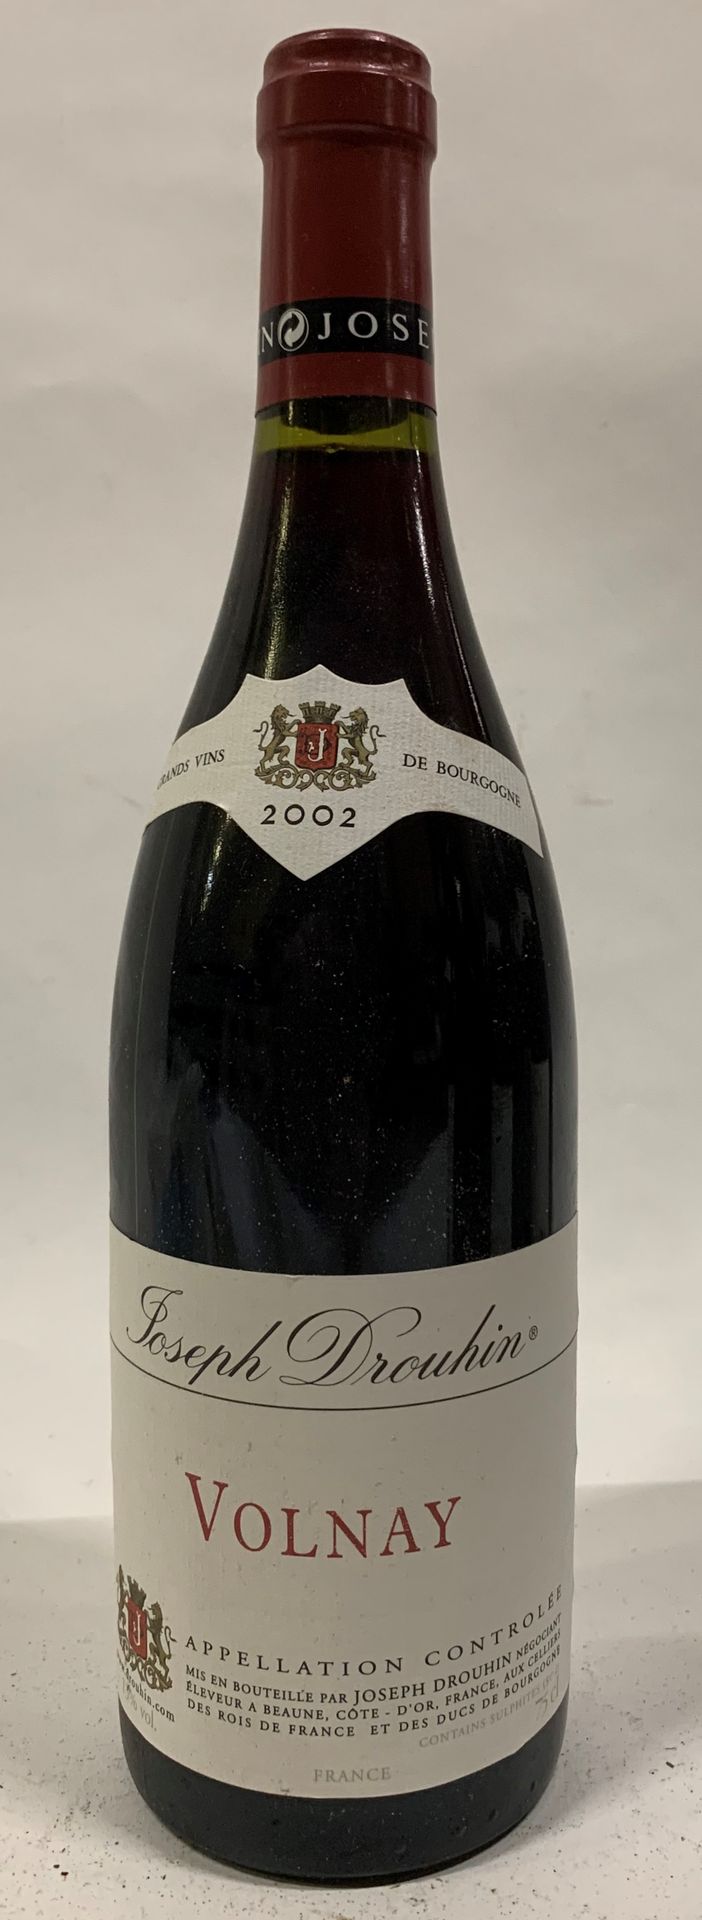 Null ● VOLNAY | Joseph Drouhin, 2002

12 bouteilles

Réf. 98